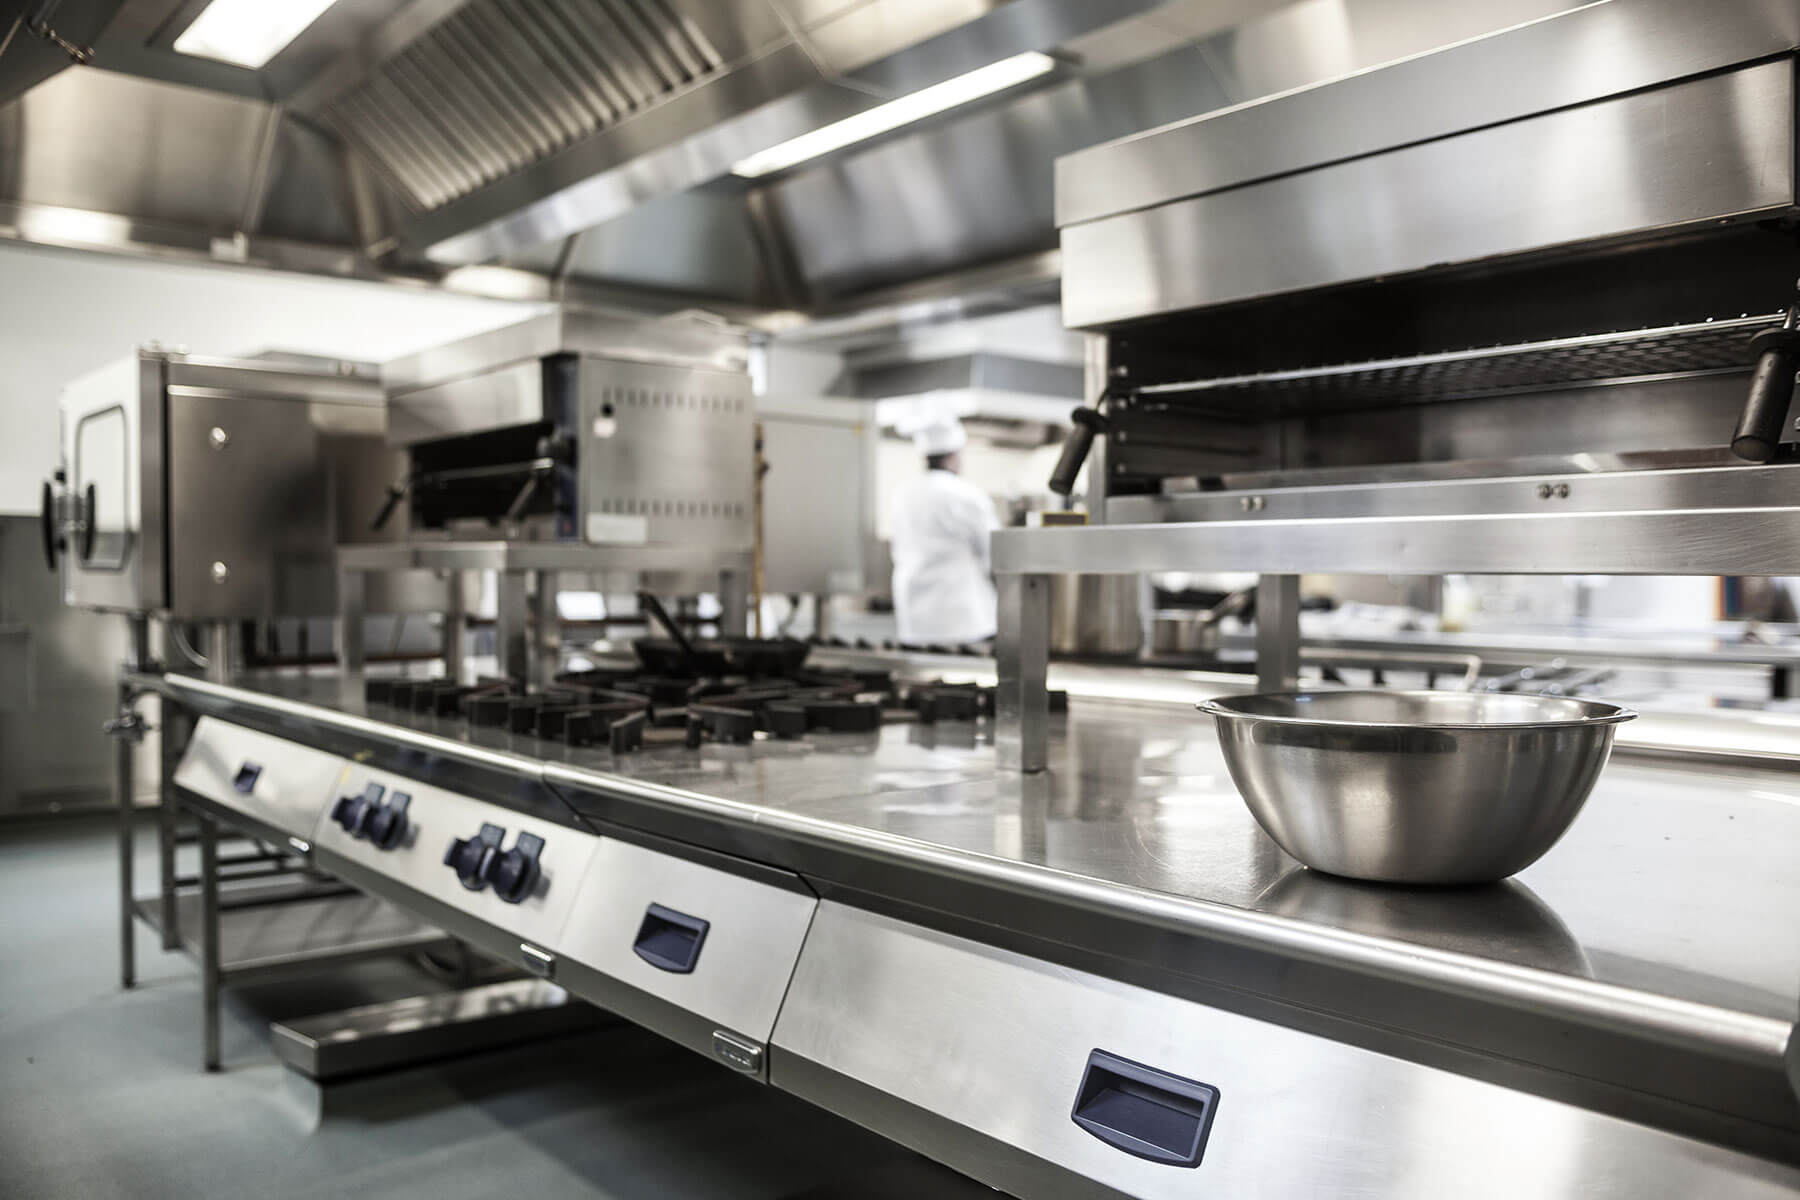 Business solutions designed for the specific needs of the restaurant equipment distribution industry